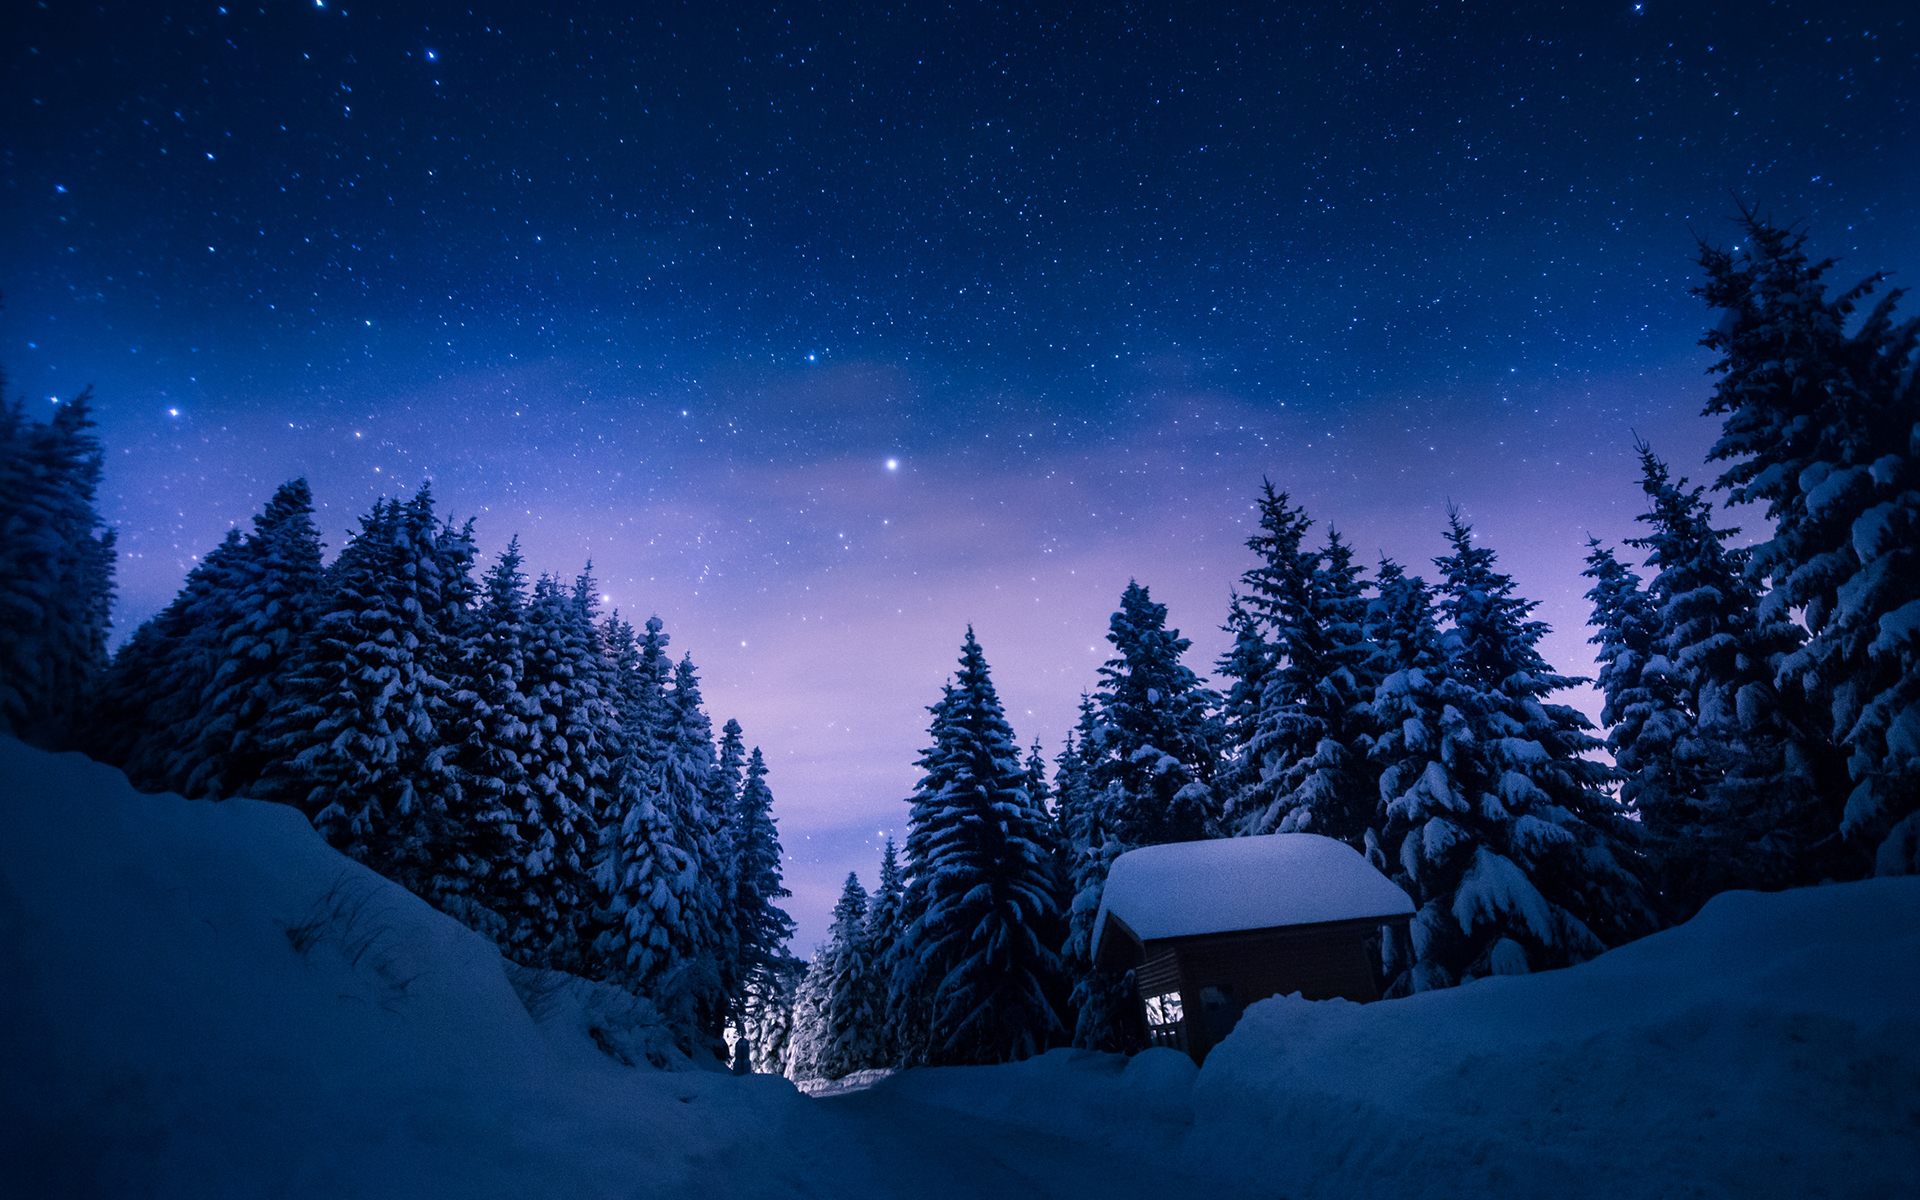 Wallpaper, nature, winter, snow, night, stars, trees, forest, cabin, path 1920x1200